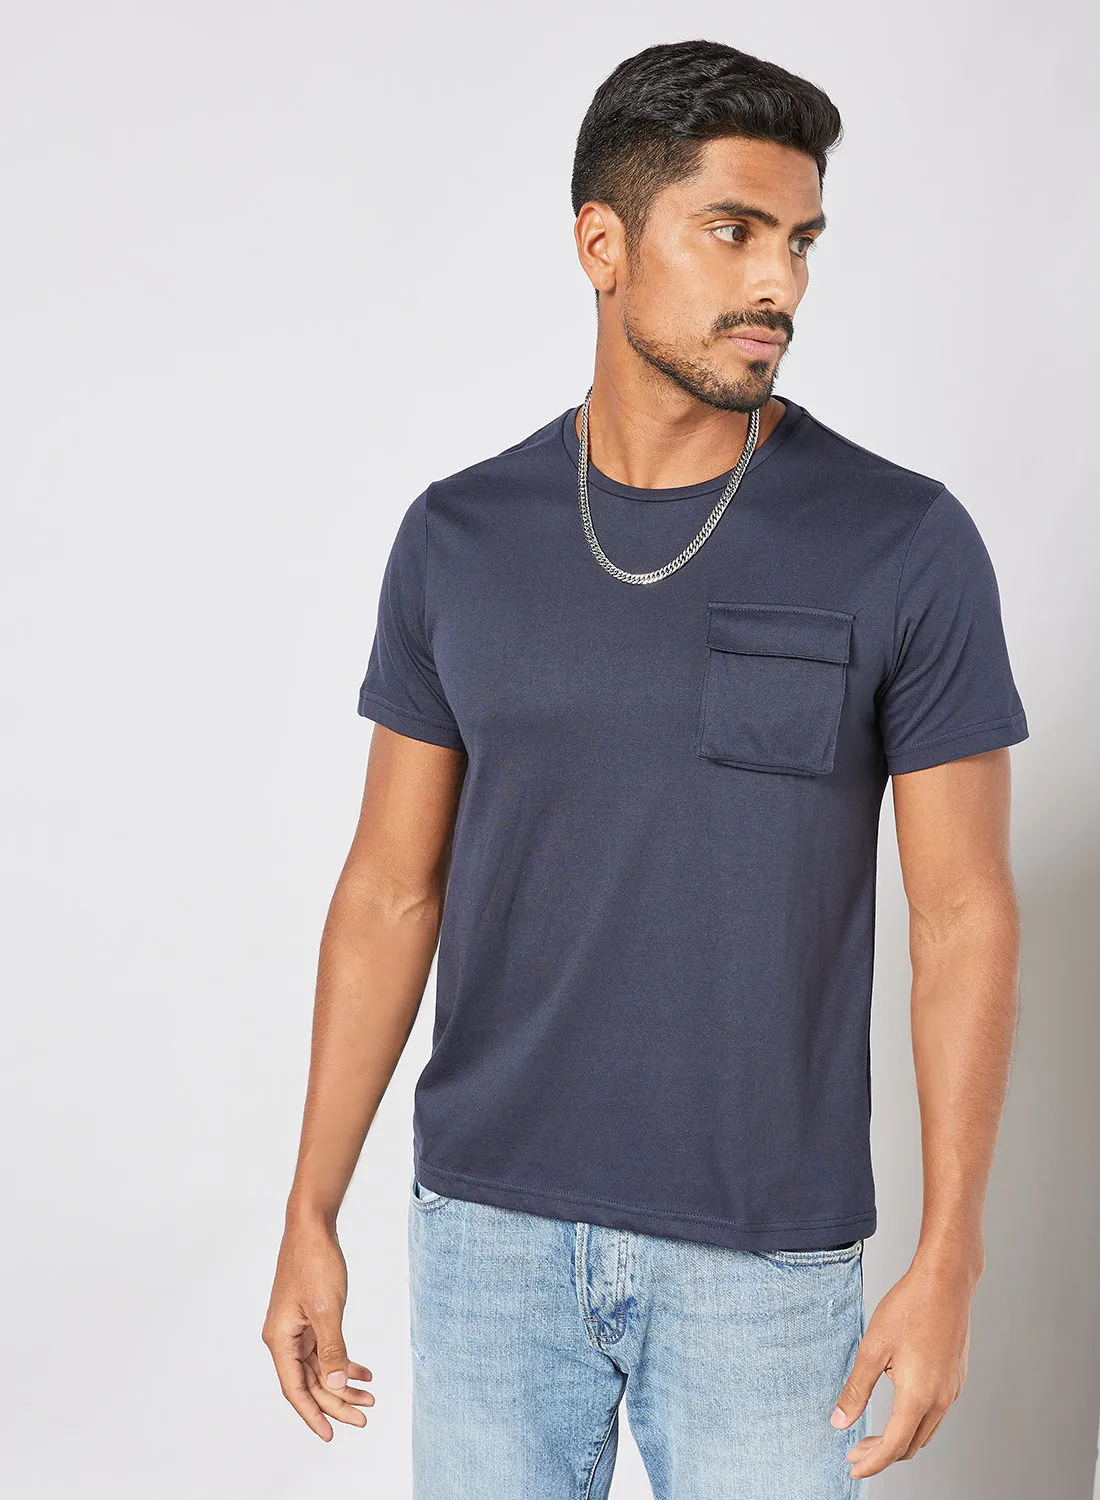 QUWA Casual Comfortable Crew Neck T-Shirt with Chest pocket Navy Blue